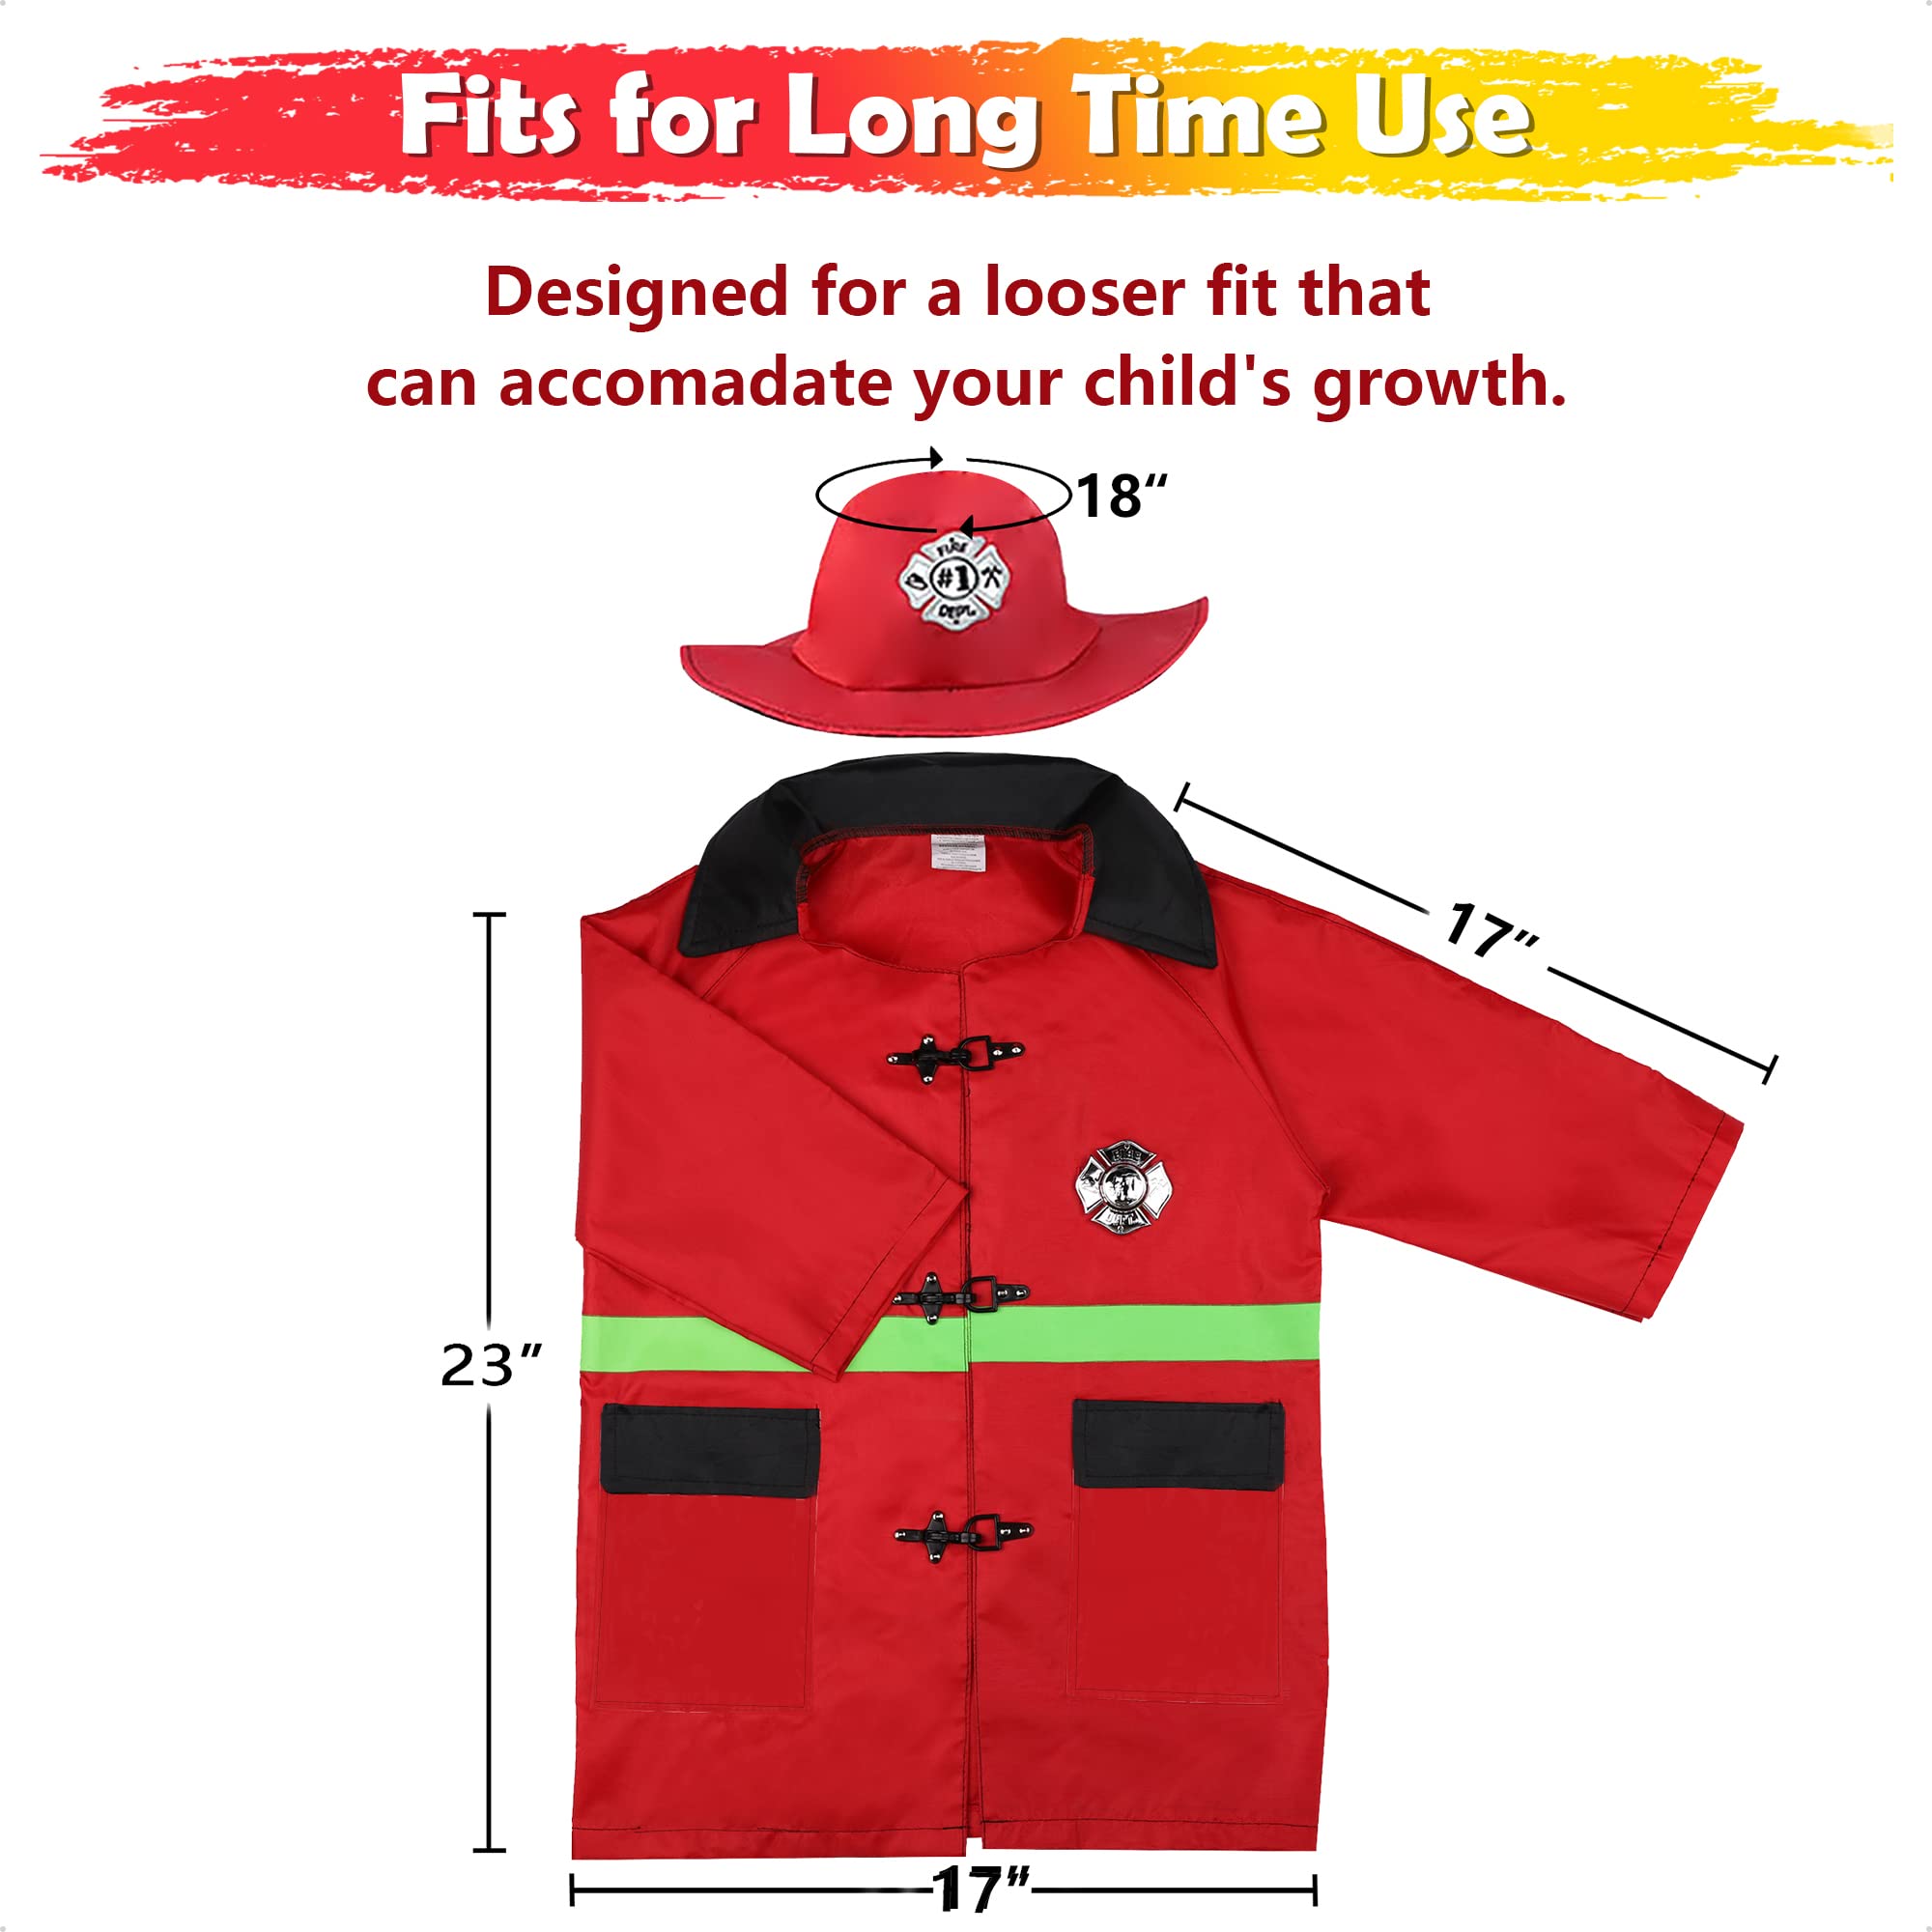 iPlay, iLearn Kids Firefighter Costume, Toddler Fireman Dress up, Fire Pretend Chief Outfit, Halloween Role Play Career Suit W/Walkie Talkie Hose, Party Birthday Gift for 3 4 5 6 7 Year Old Boy Girl